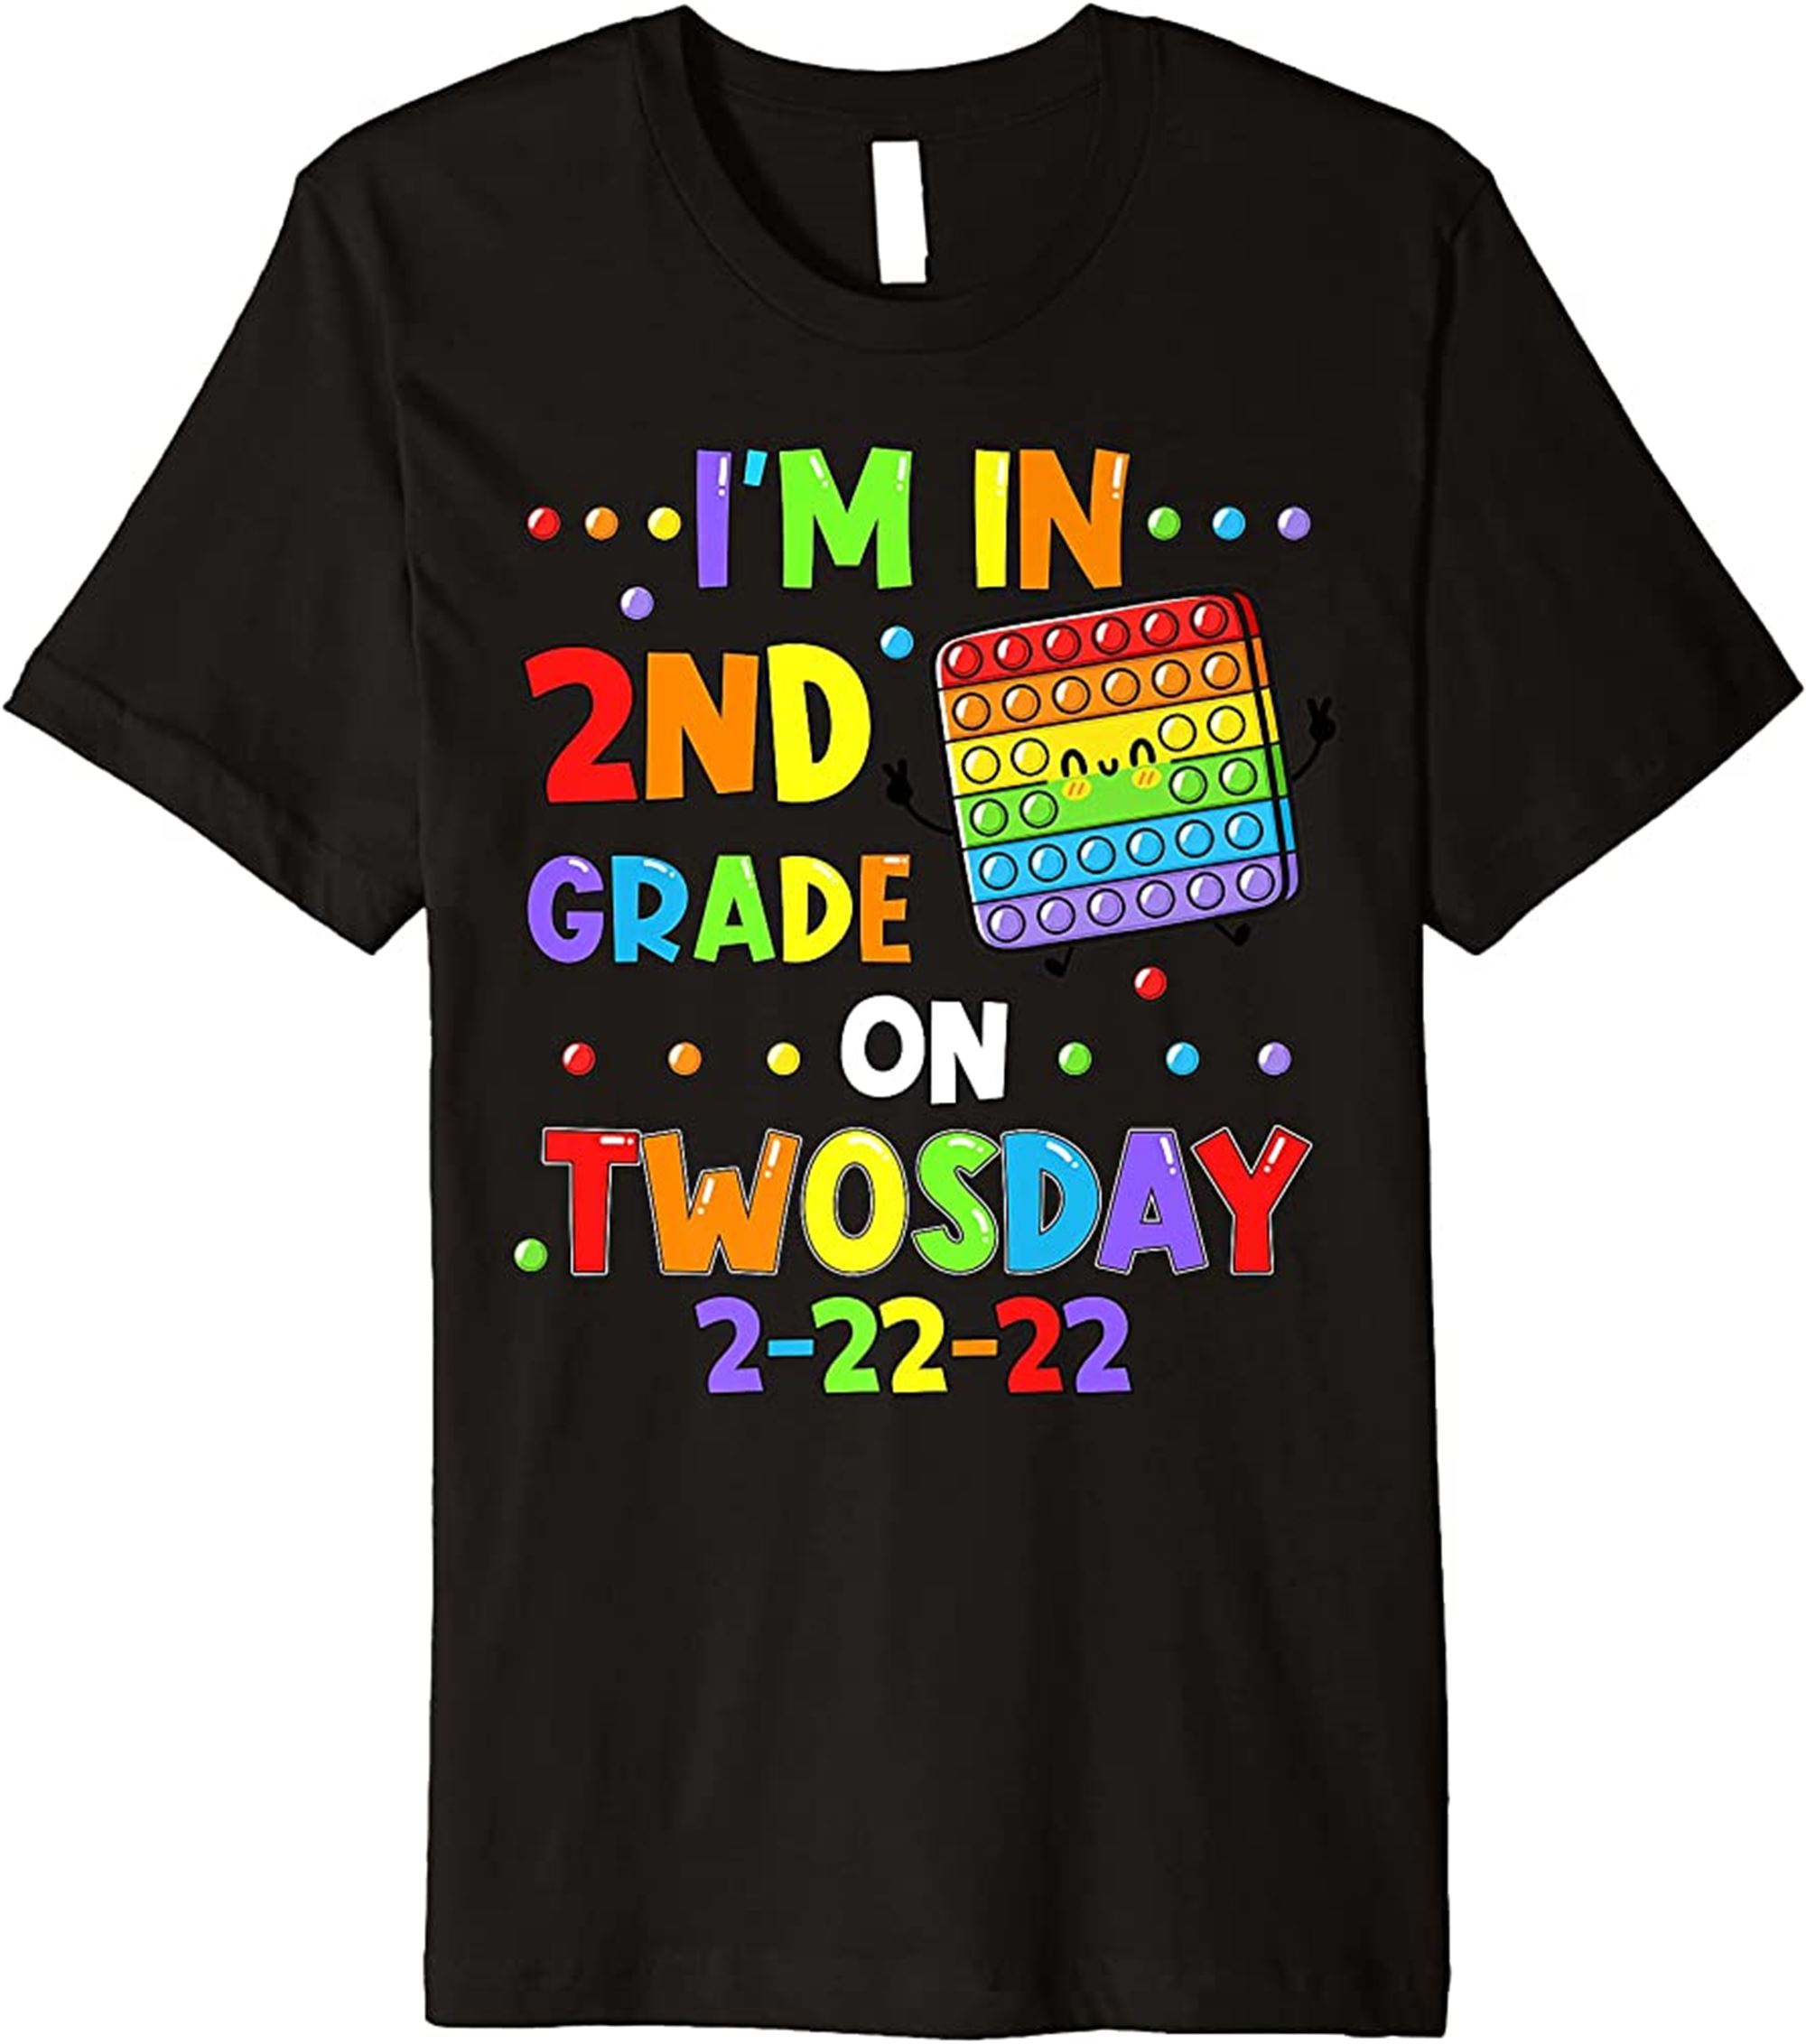 Second Grade On Twosday 22222 Tuesday February 22nd 2022 Premium T-shirt Full Size Up To 5xl